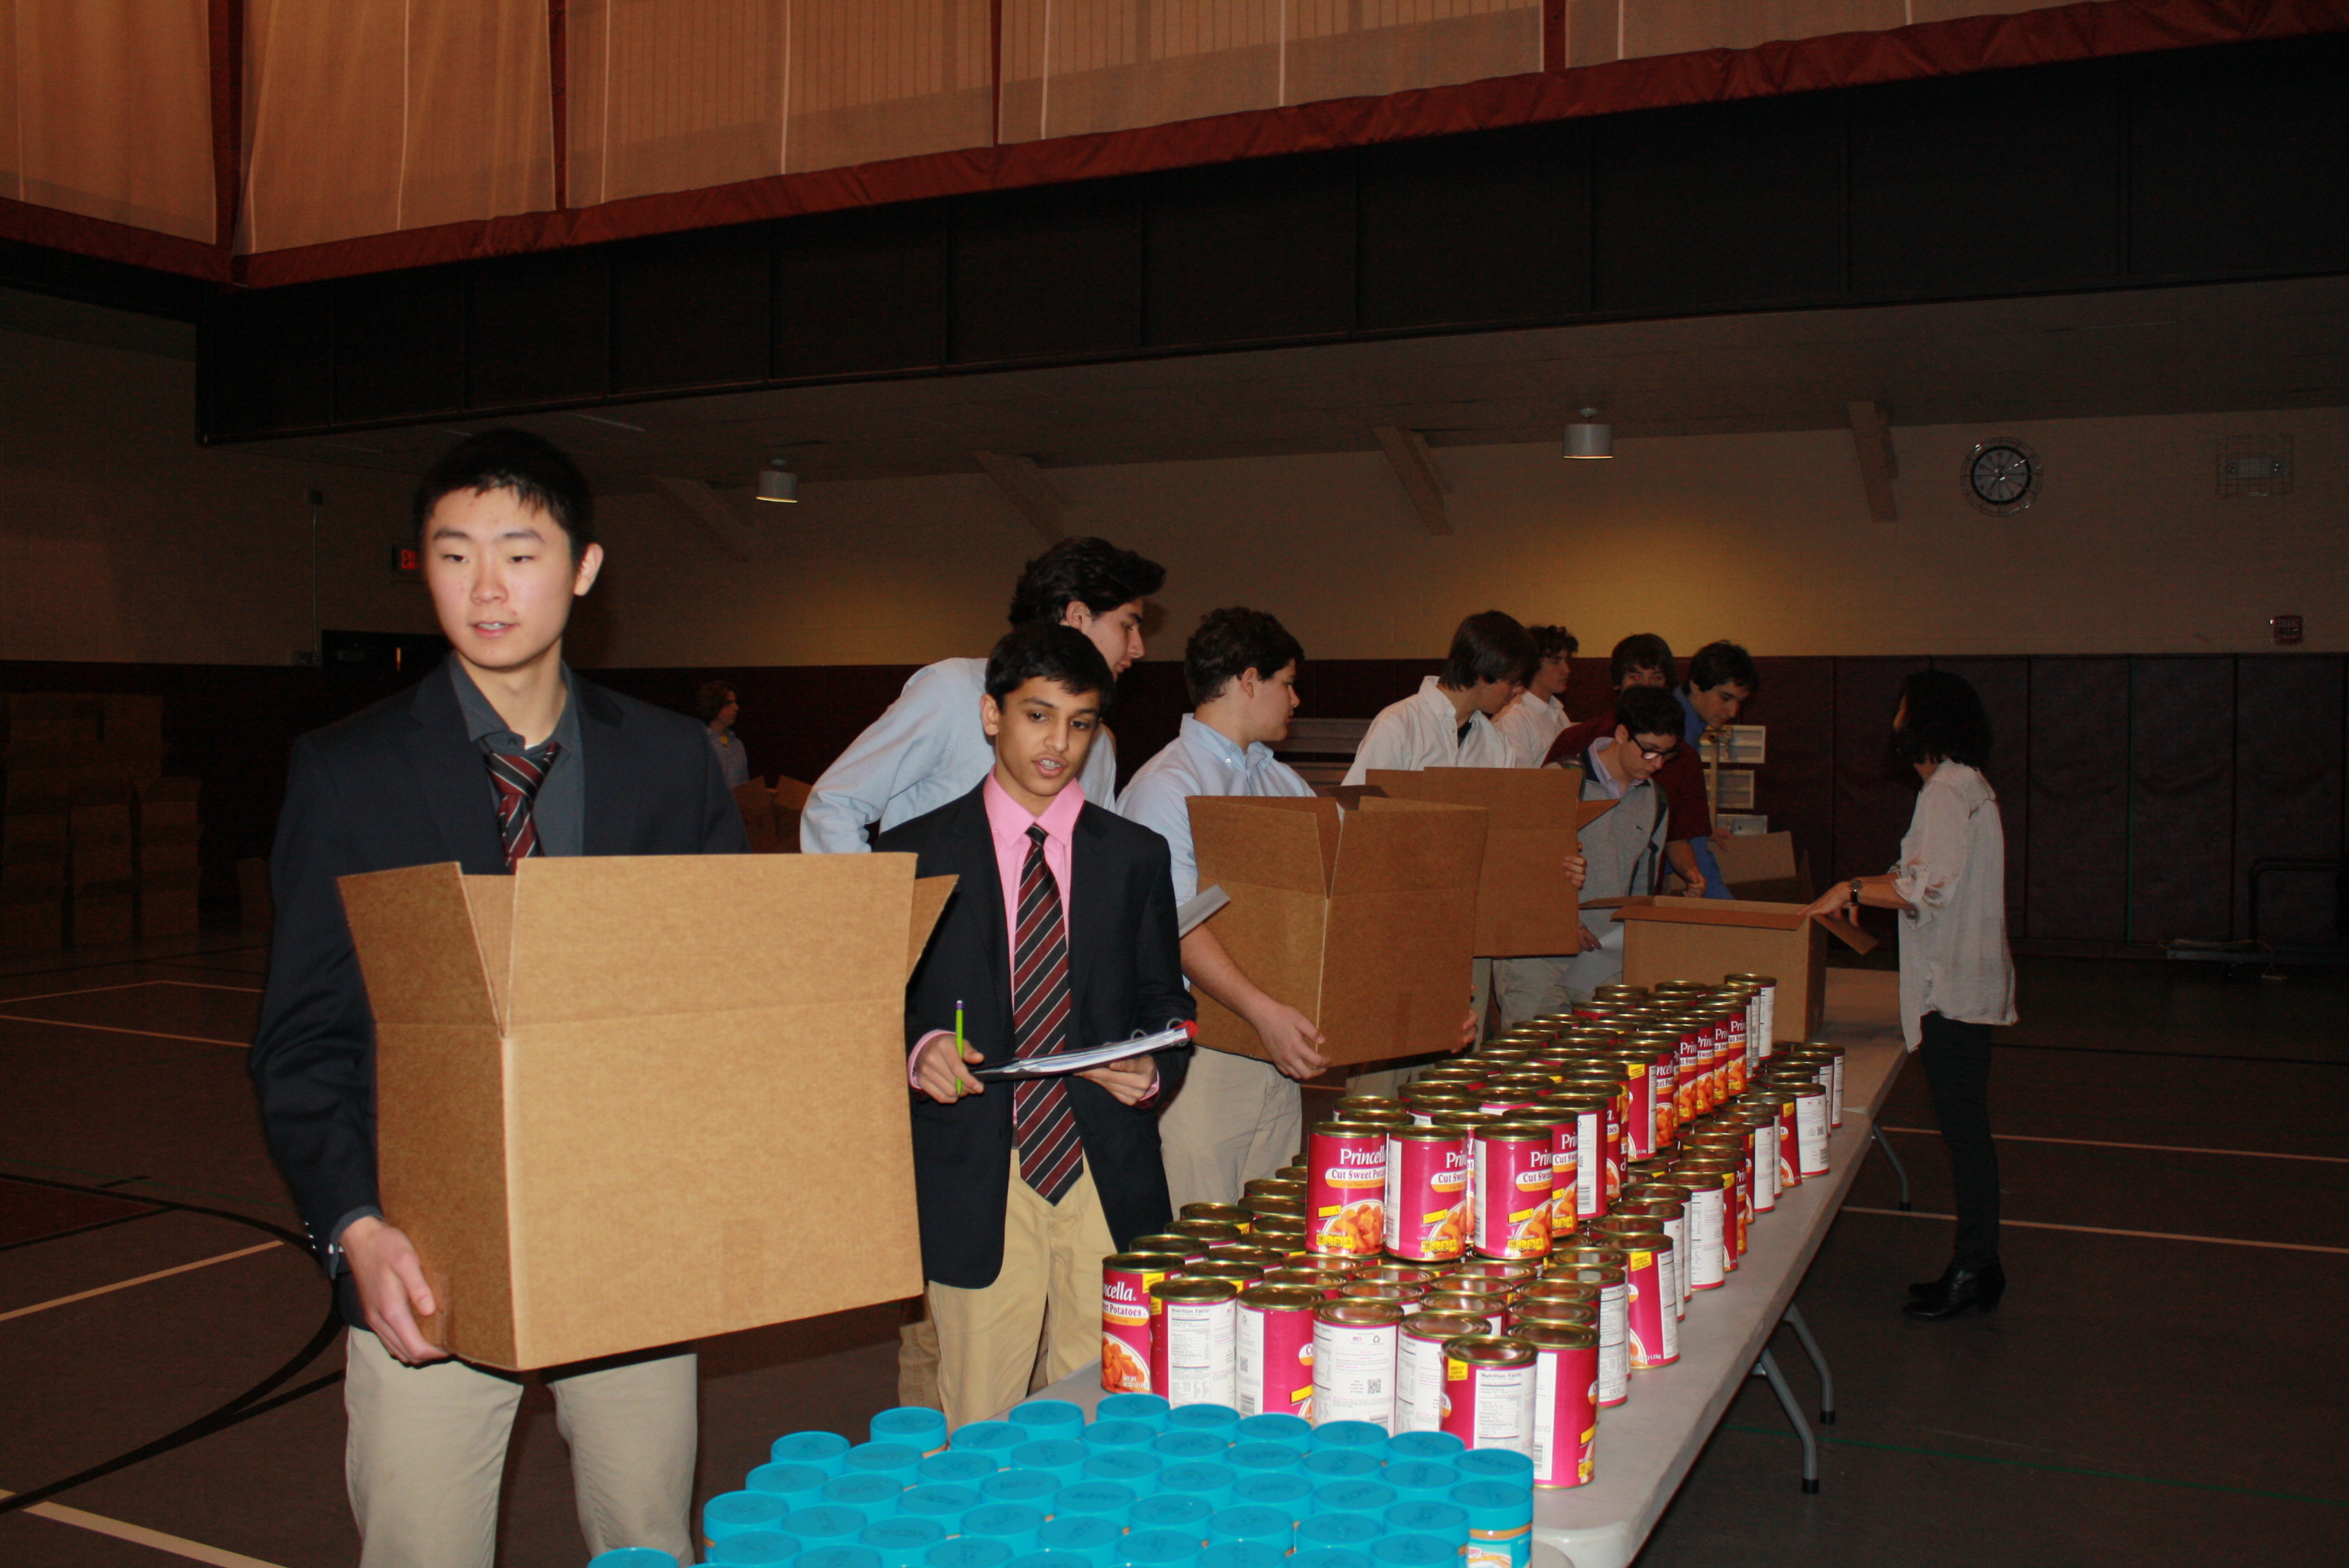 The Thanksgiving food drive is a 30-year tradition at University School.